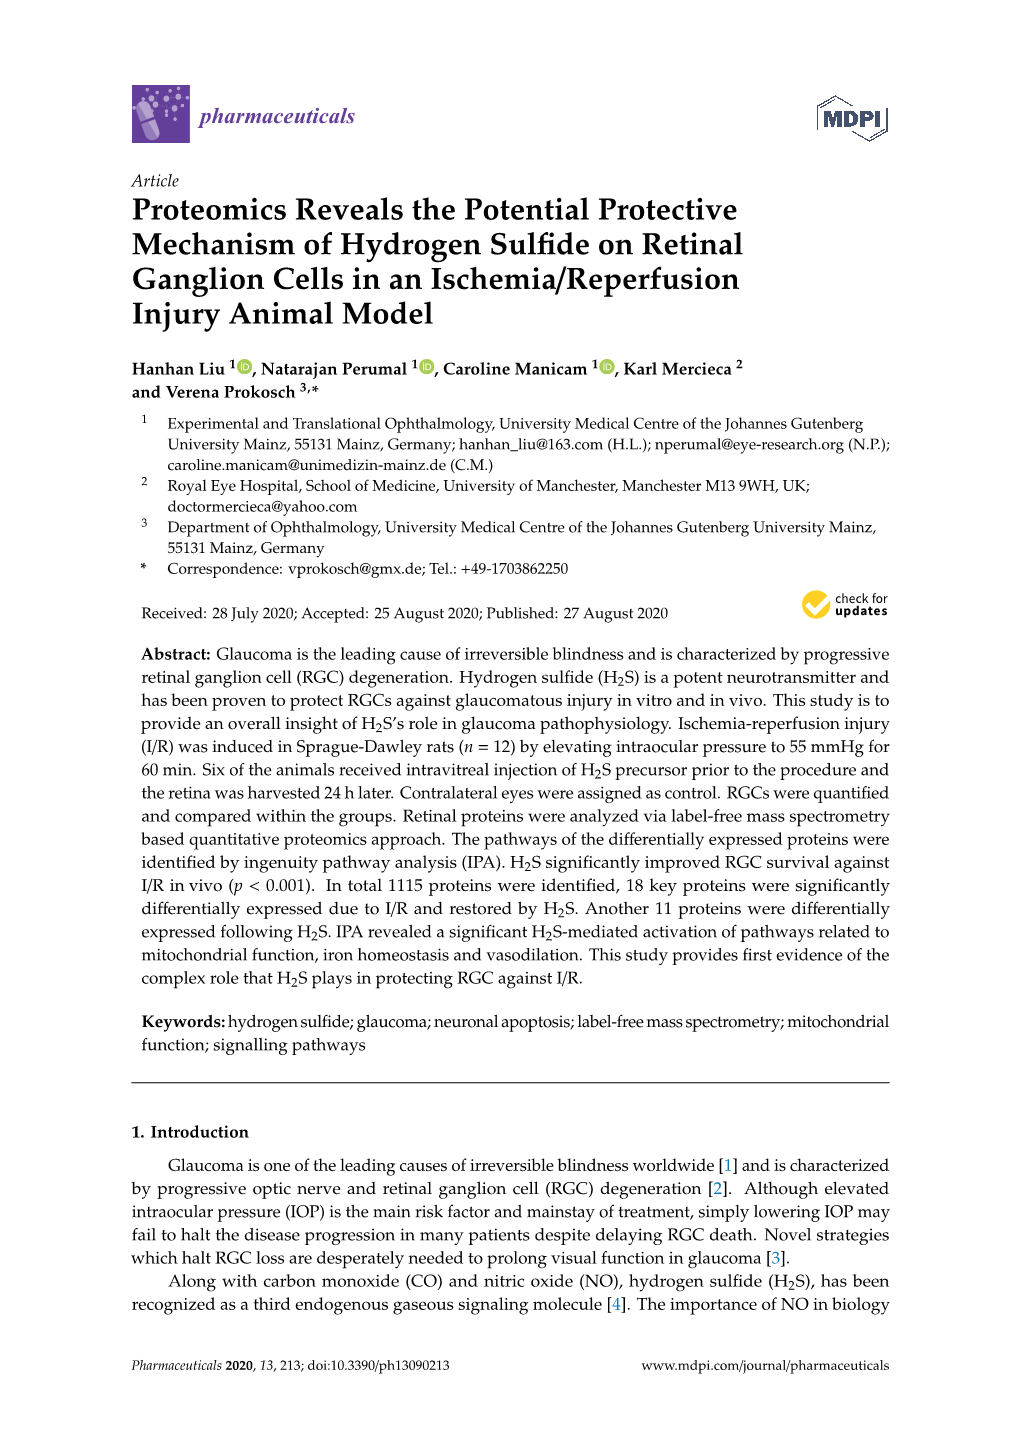 Proteomics Reveals the Potential Protective Mechanism of Hydrogen Sulﬁde on Retinal Ganglion Cells in an Ischemia/Reperfusion Injury Animal Model